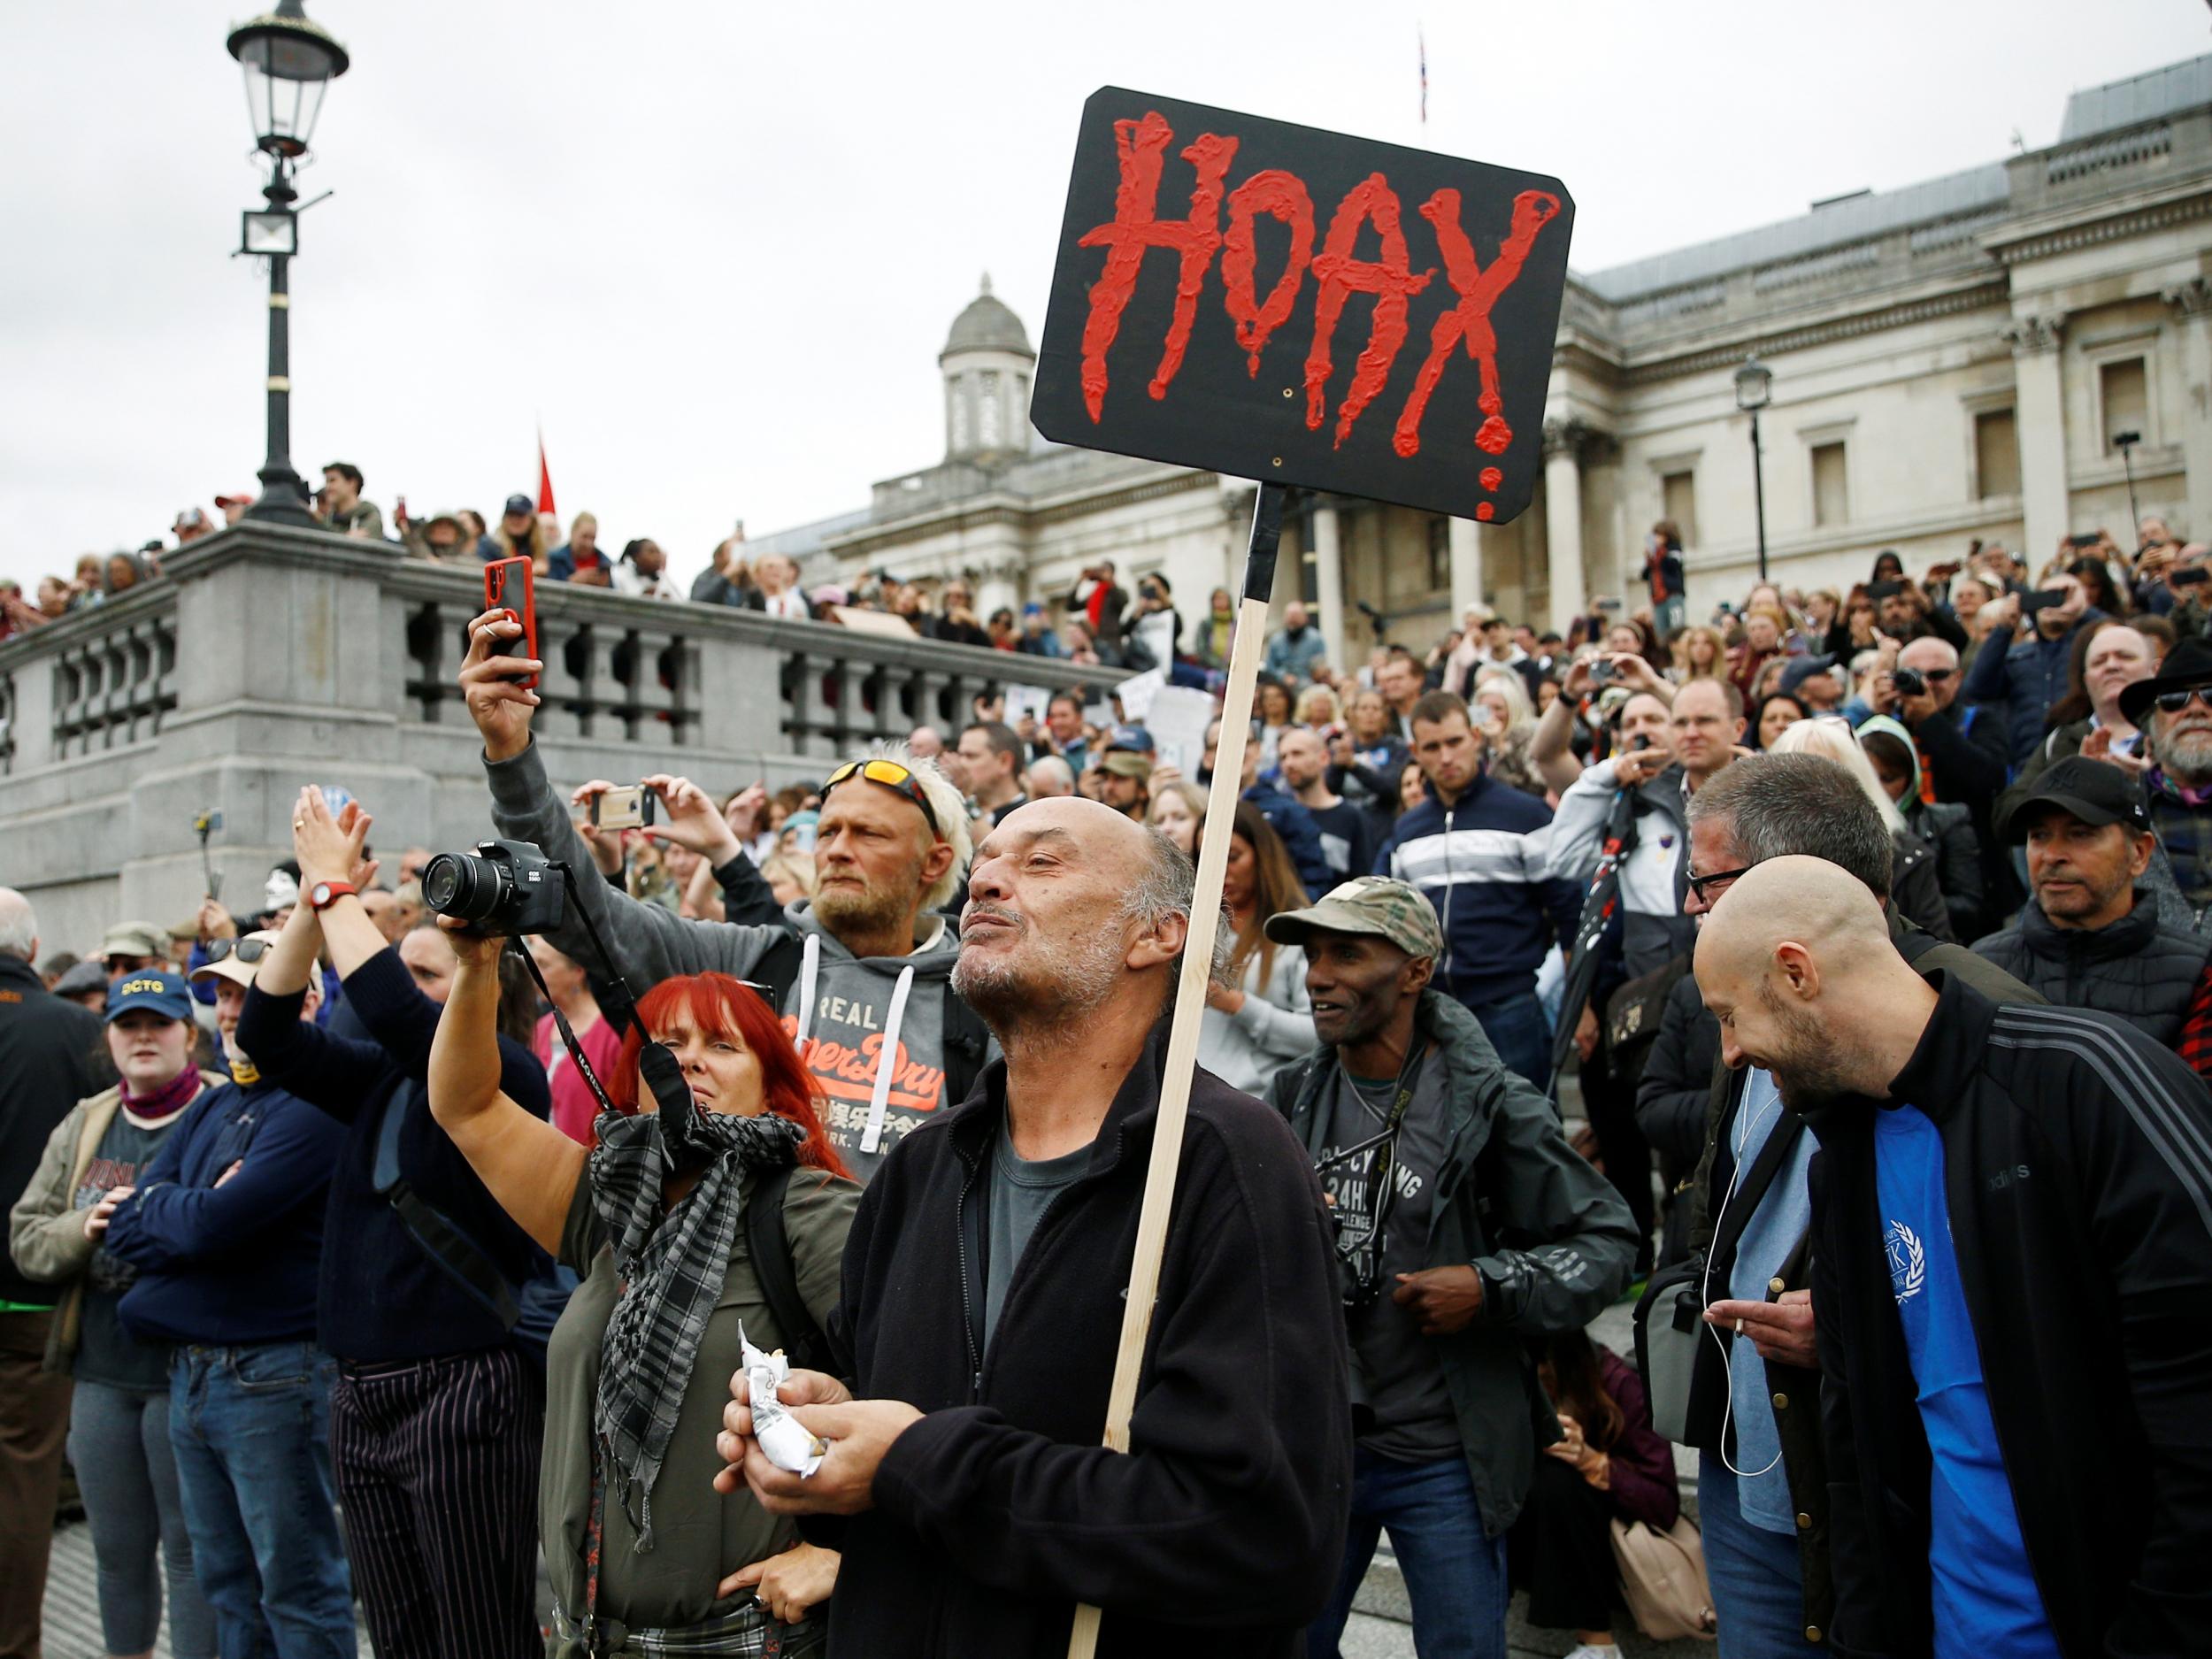 Protesters demonstrate against the lockdown and use of face masks in Trafalgar Square, amid the coronavirus pandemic